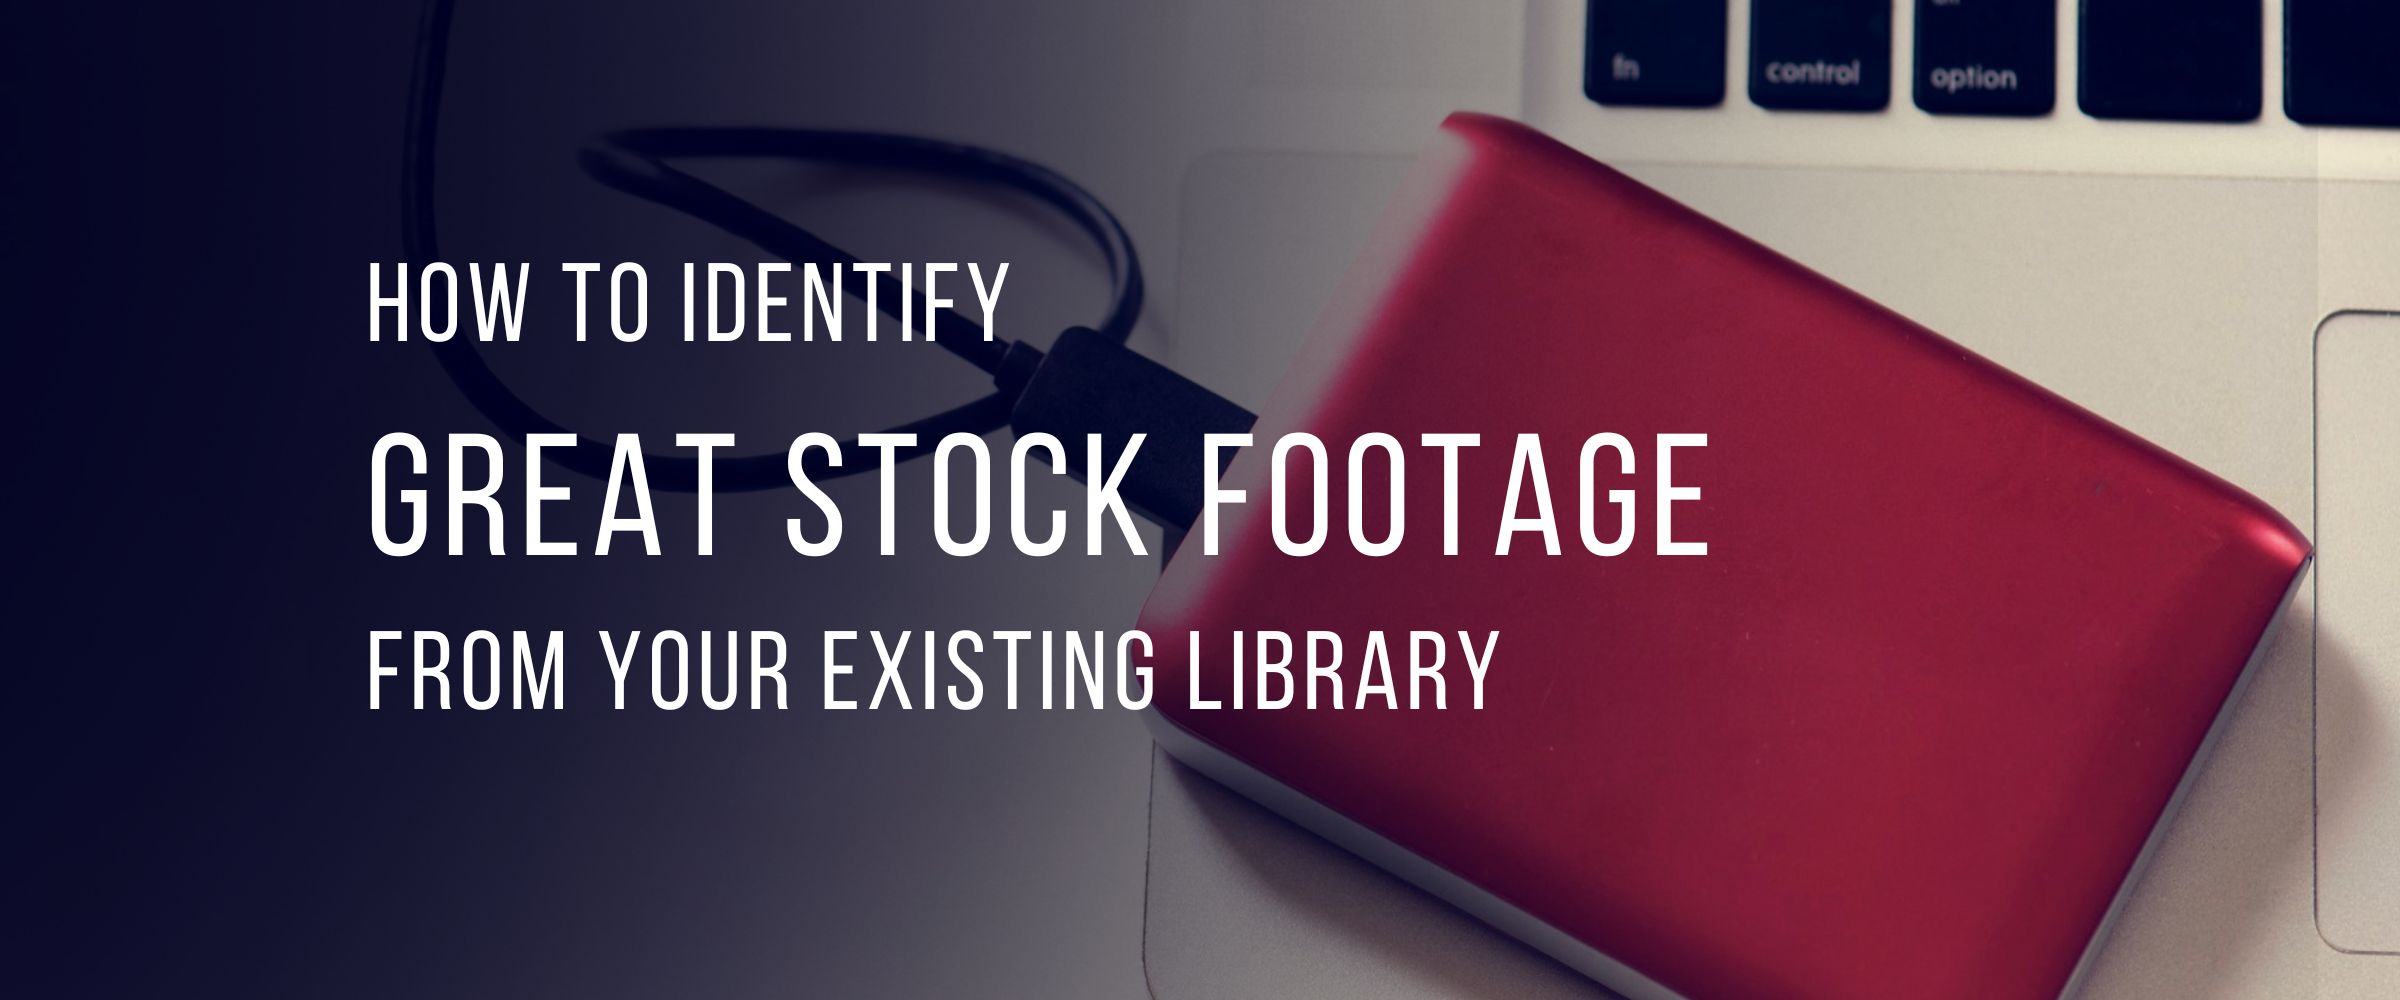 Identify Great Stock Footage from your Existing Library